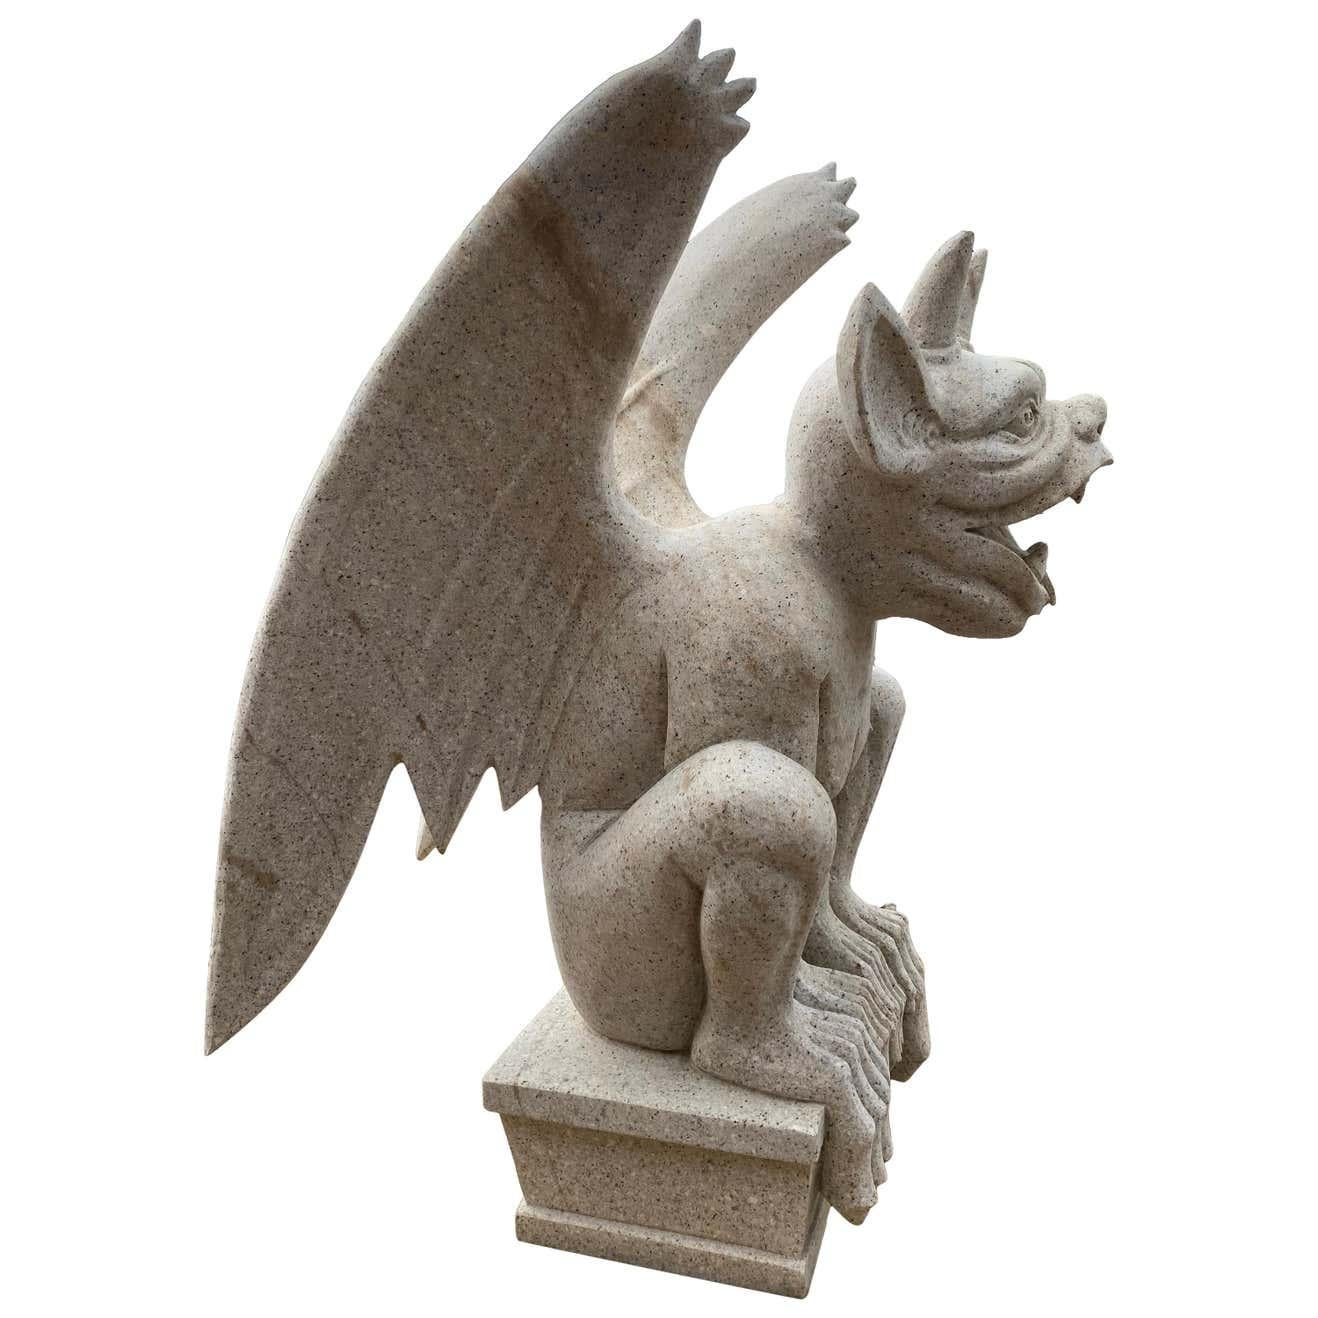 An impressive hand carved large 20th century granite Gargoyle. Very much in the gothic style. Fantastic as decorative sculpture or permanent building fixture.